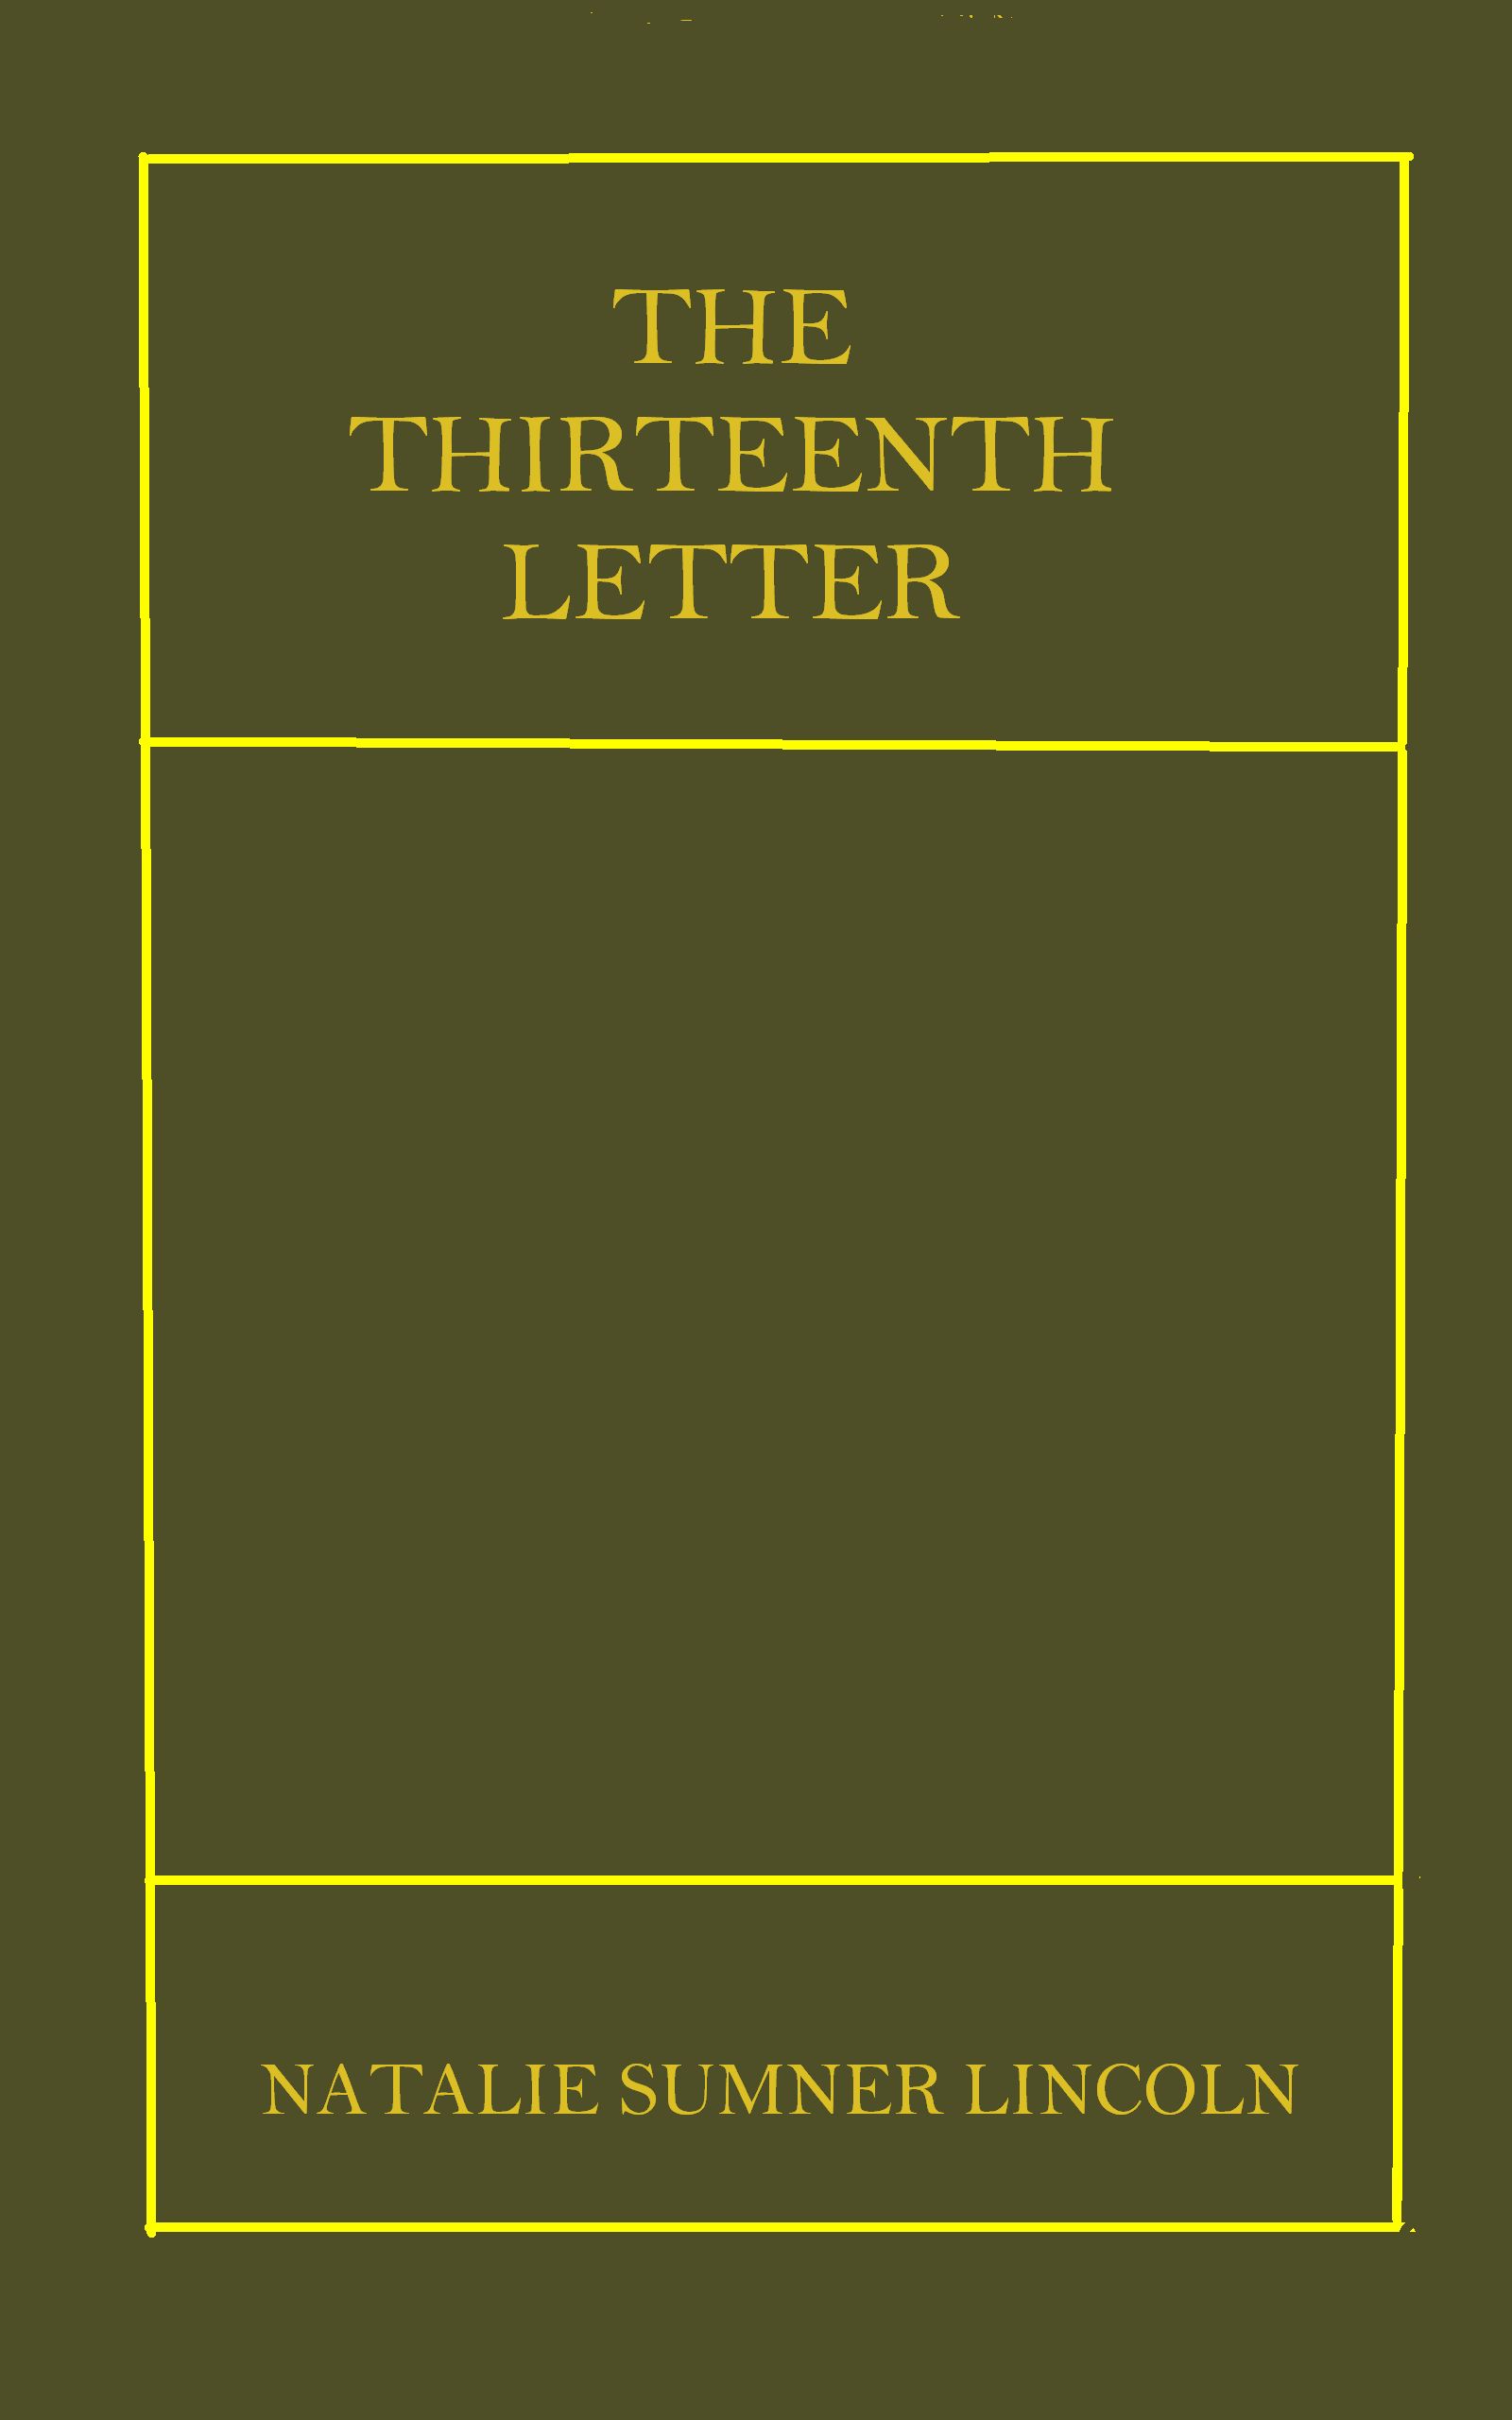 The Thirteenth Letter, by Natalie Sumner Lincoln—A Project Gutenberg eBook